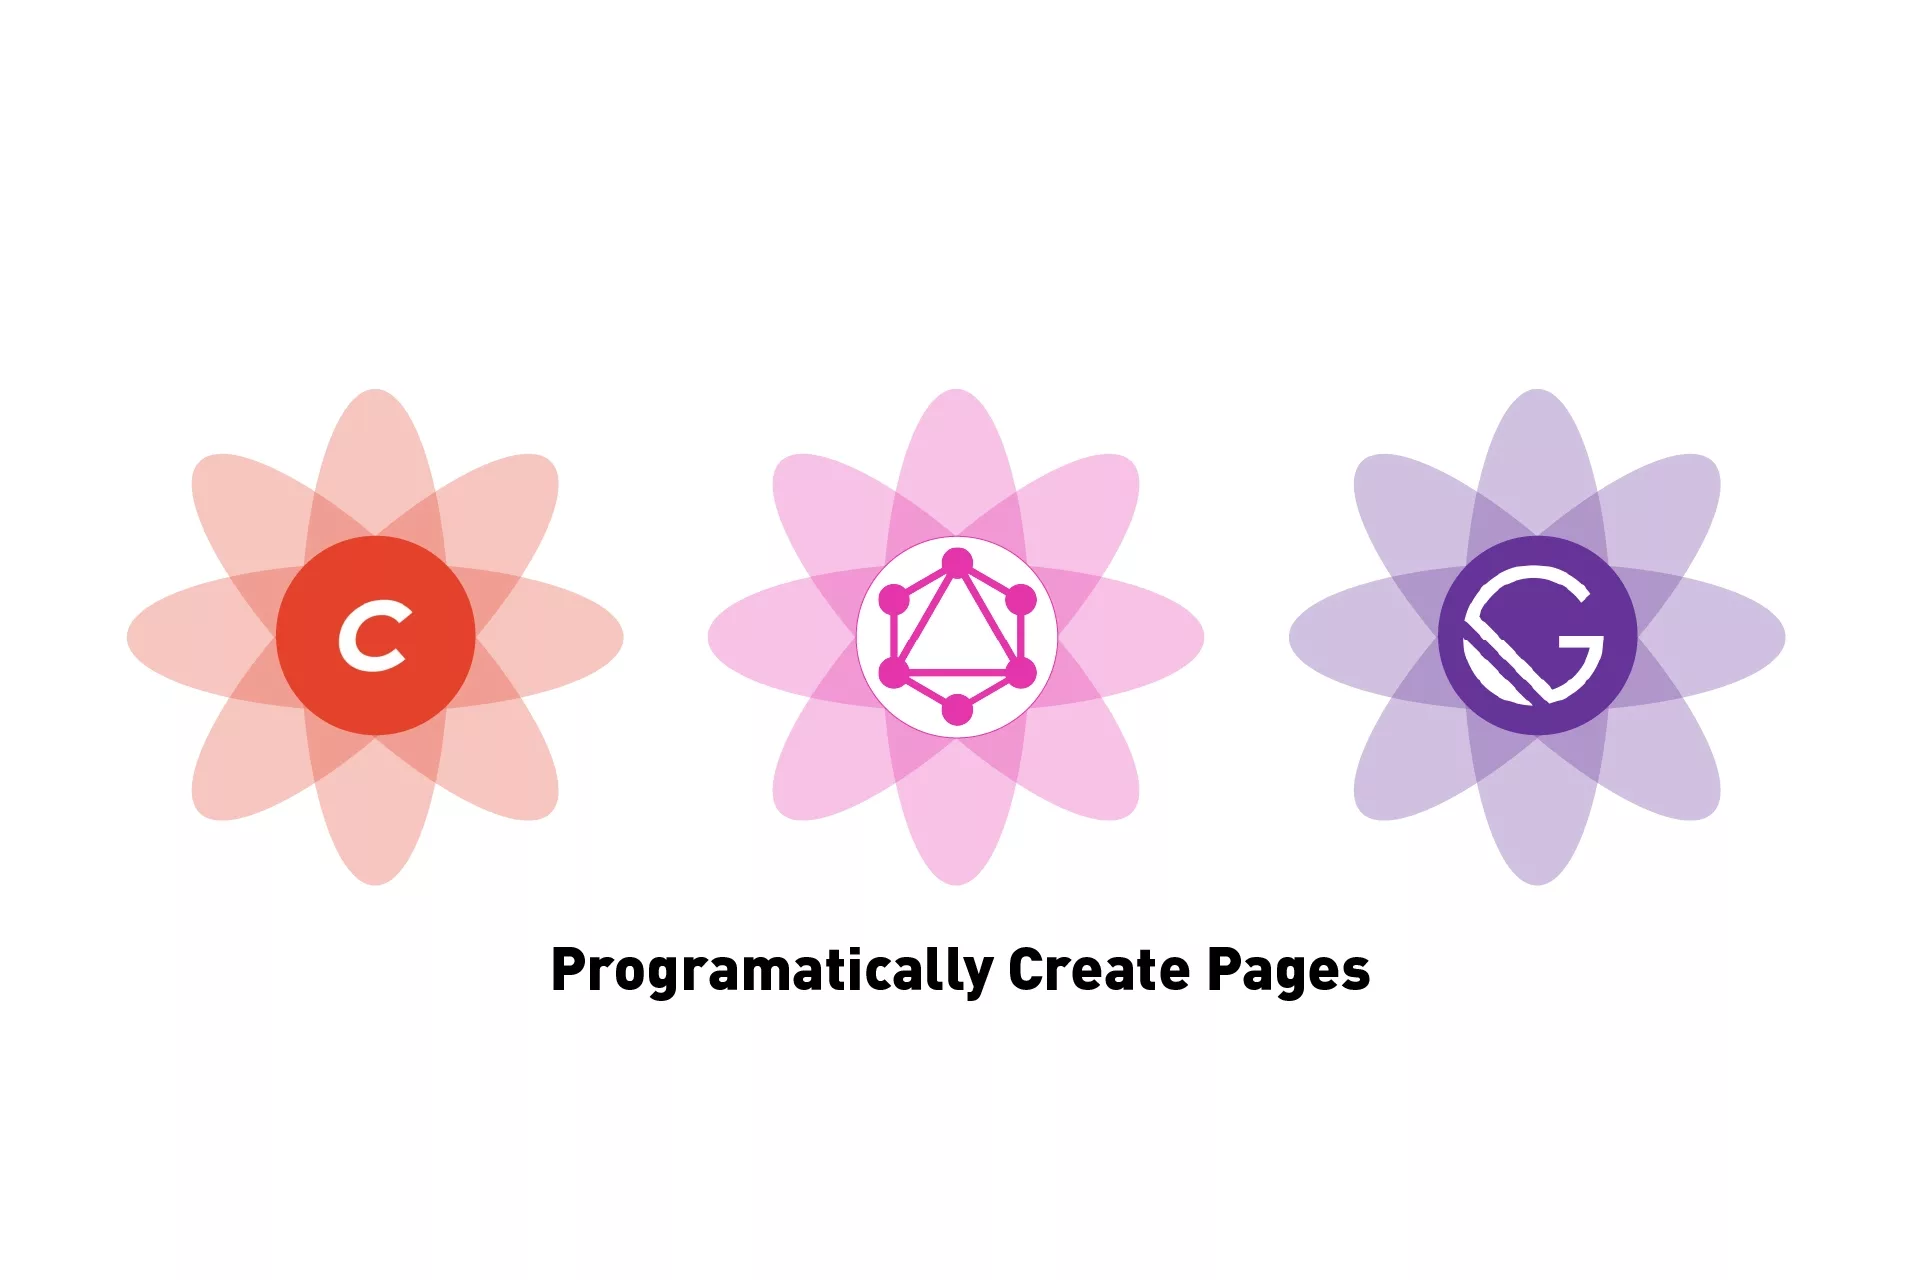 Three flowers that represent Craft CMS, GraphQL & Gatsby side by side, beneath them sits the text 'Programatically Create Pages'.